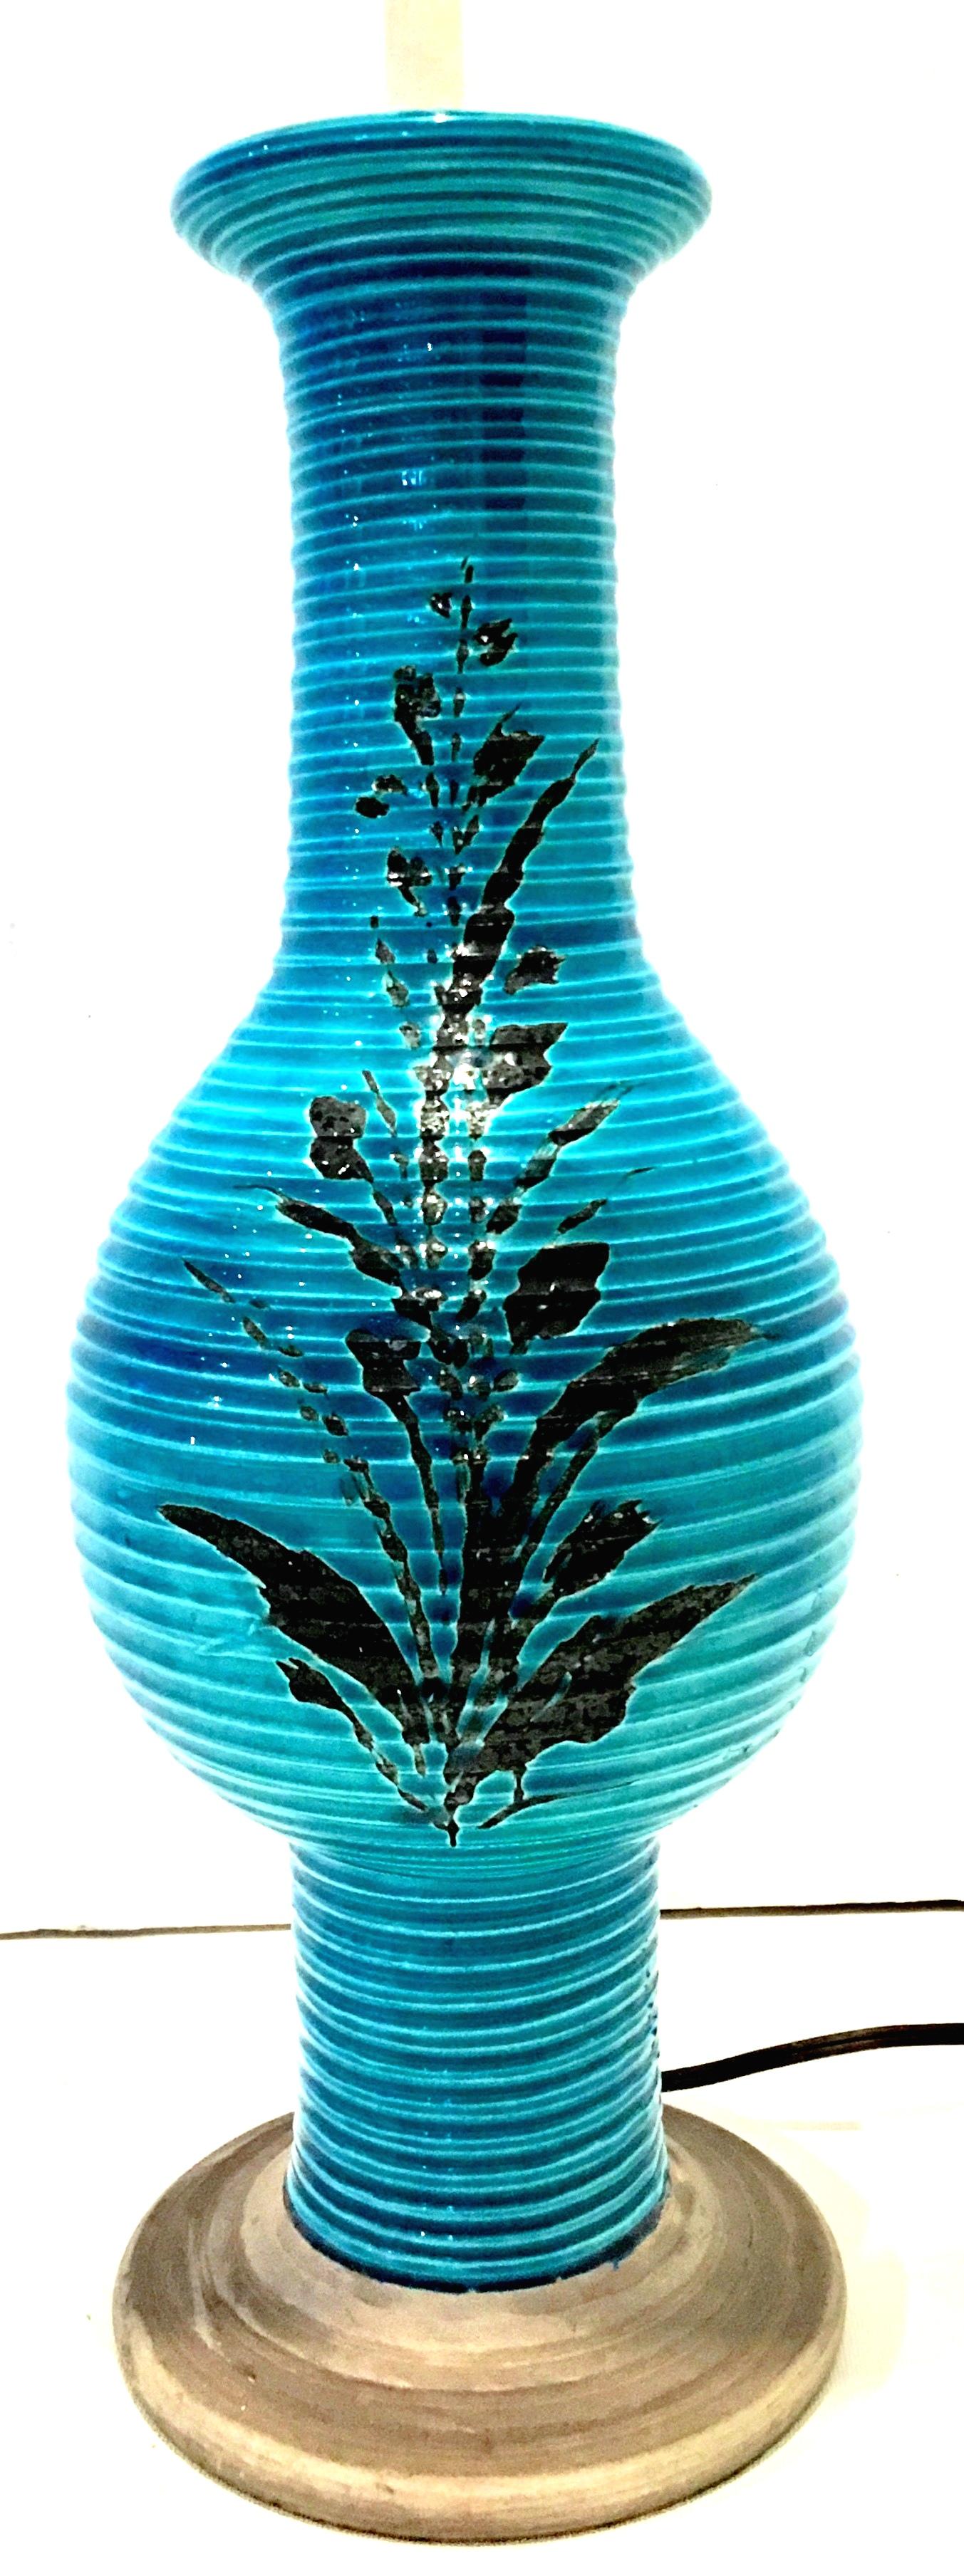 1960s Italian Cerulean Blue & Black Ceramic Glaze Pottery Lamp by, Bitossi In Good Condition For Sale In West Palm Beach, FL